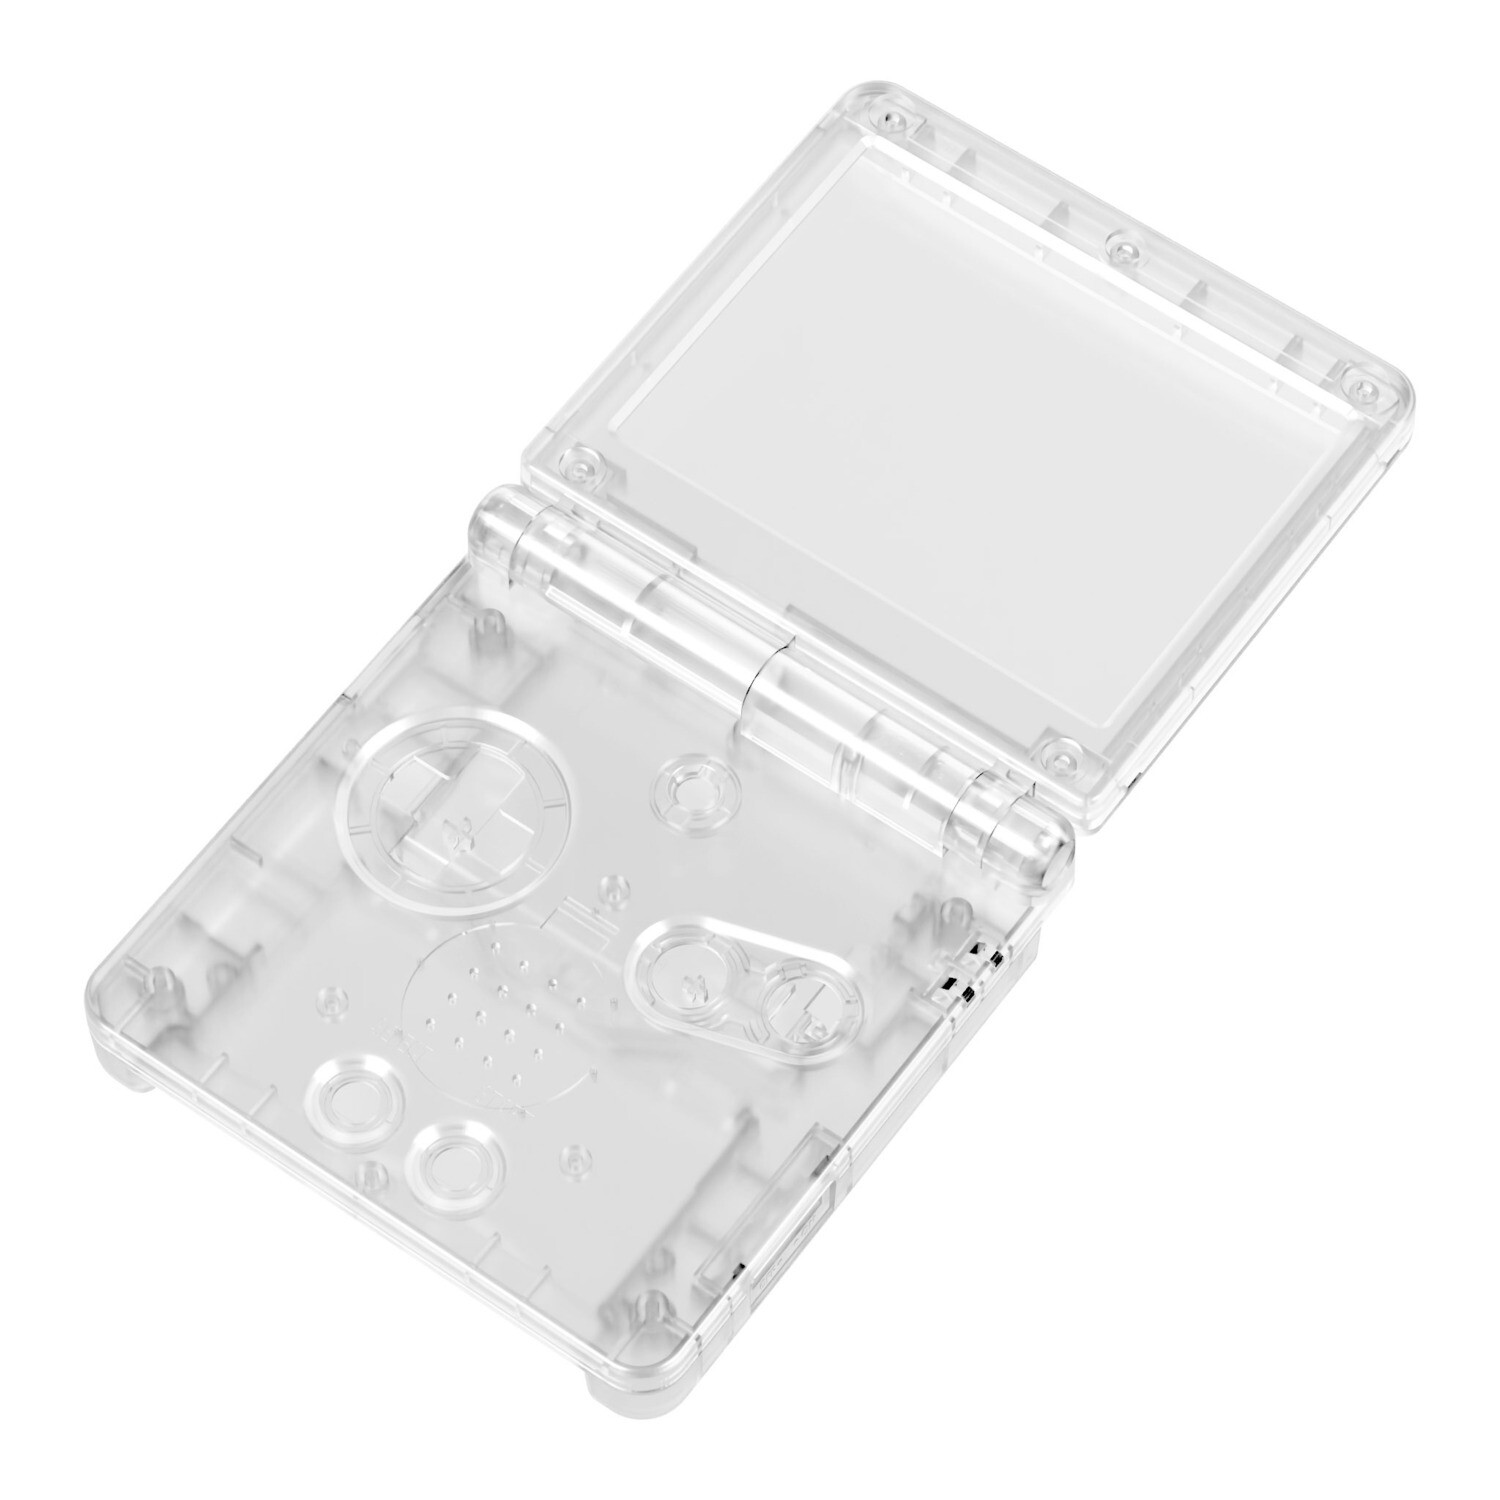 Game Boy Advance SP Shell (Clear)